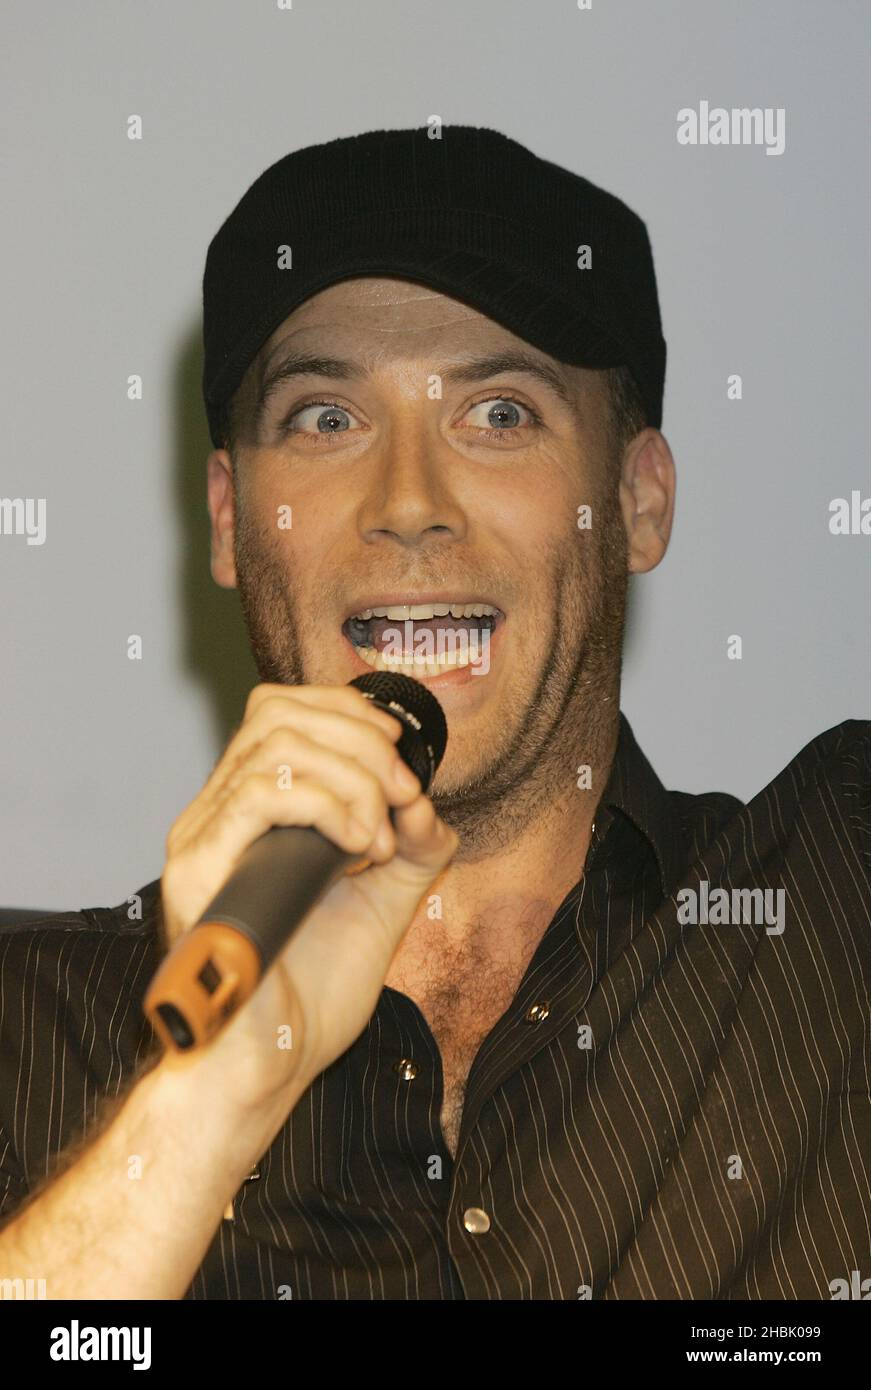 J (Jason 'J' Brown) from boyband Five - who now comprise four members - during a press conference to announce their reunion, at Bar Academy in Islington, north London. Stock Photo